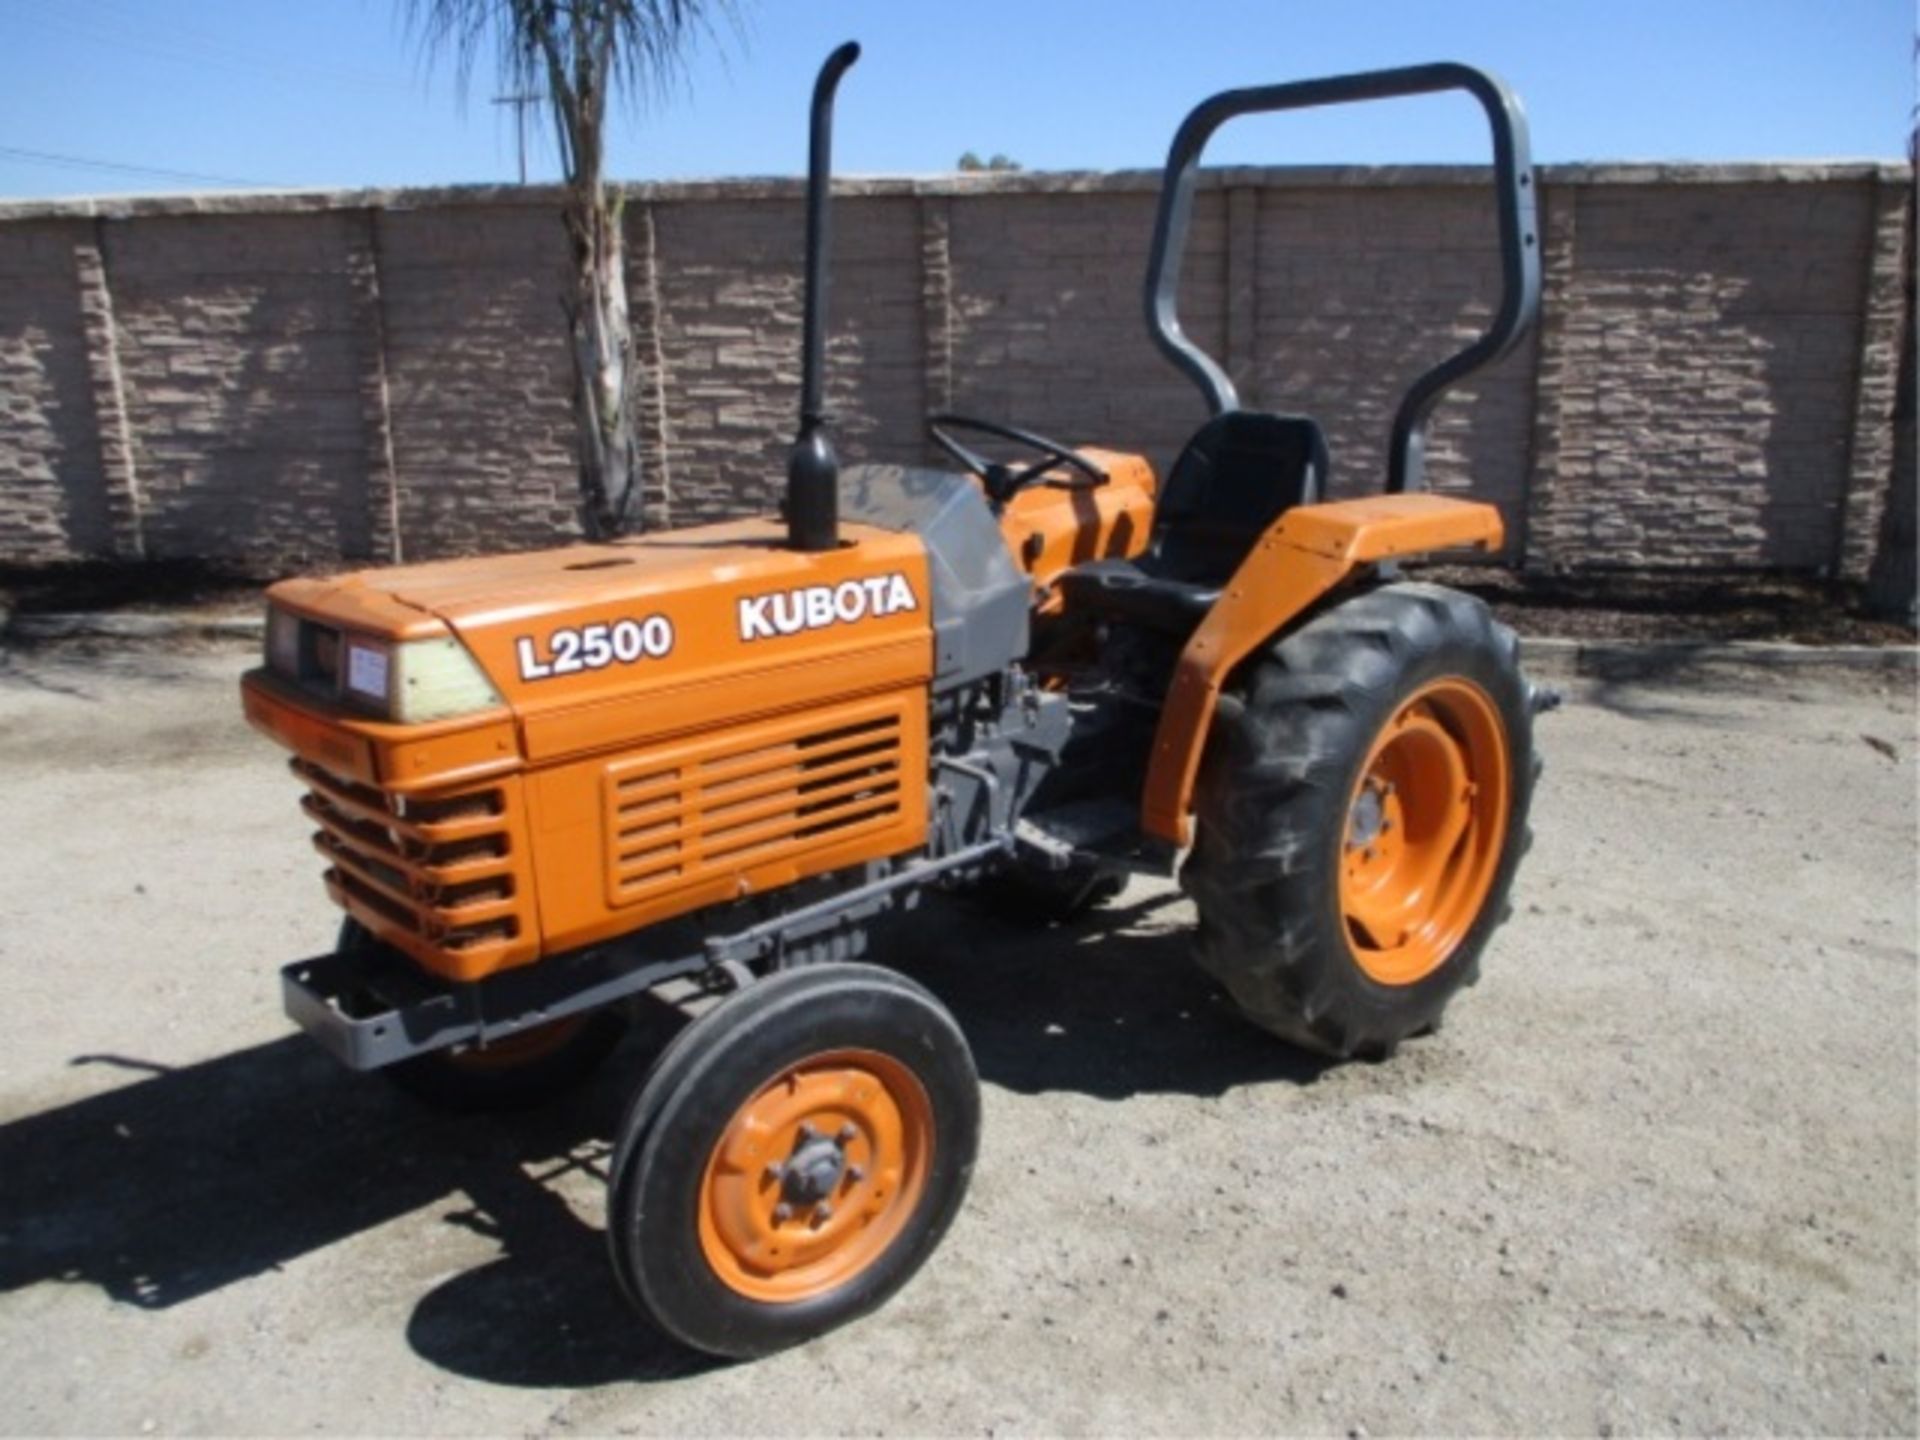 Kubota L2500 Utility Ag Tractor, 3-Cyl Diesel, PTO, 3-Point Hitch, Roll Bar, S/N: 21247, Mile/ - Image 2 of 40